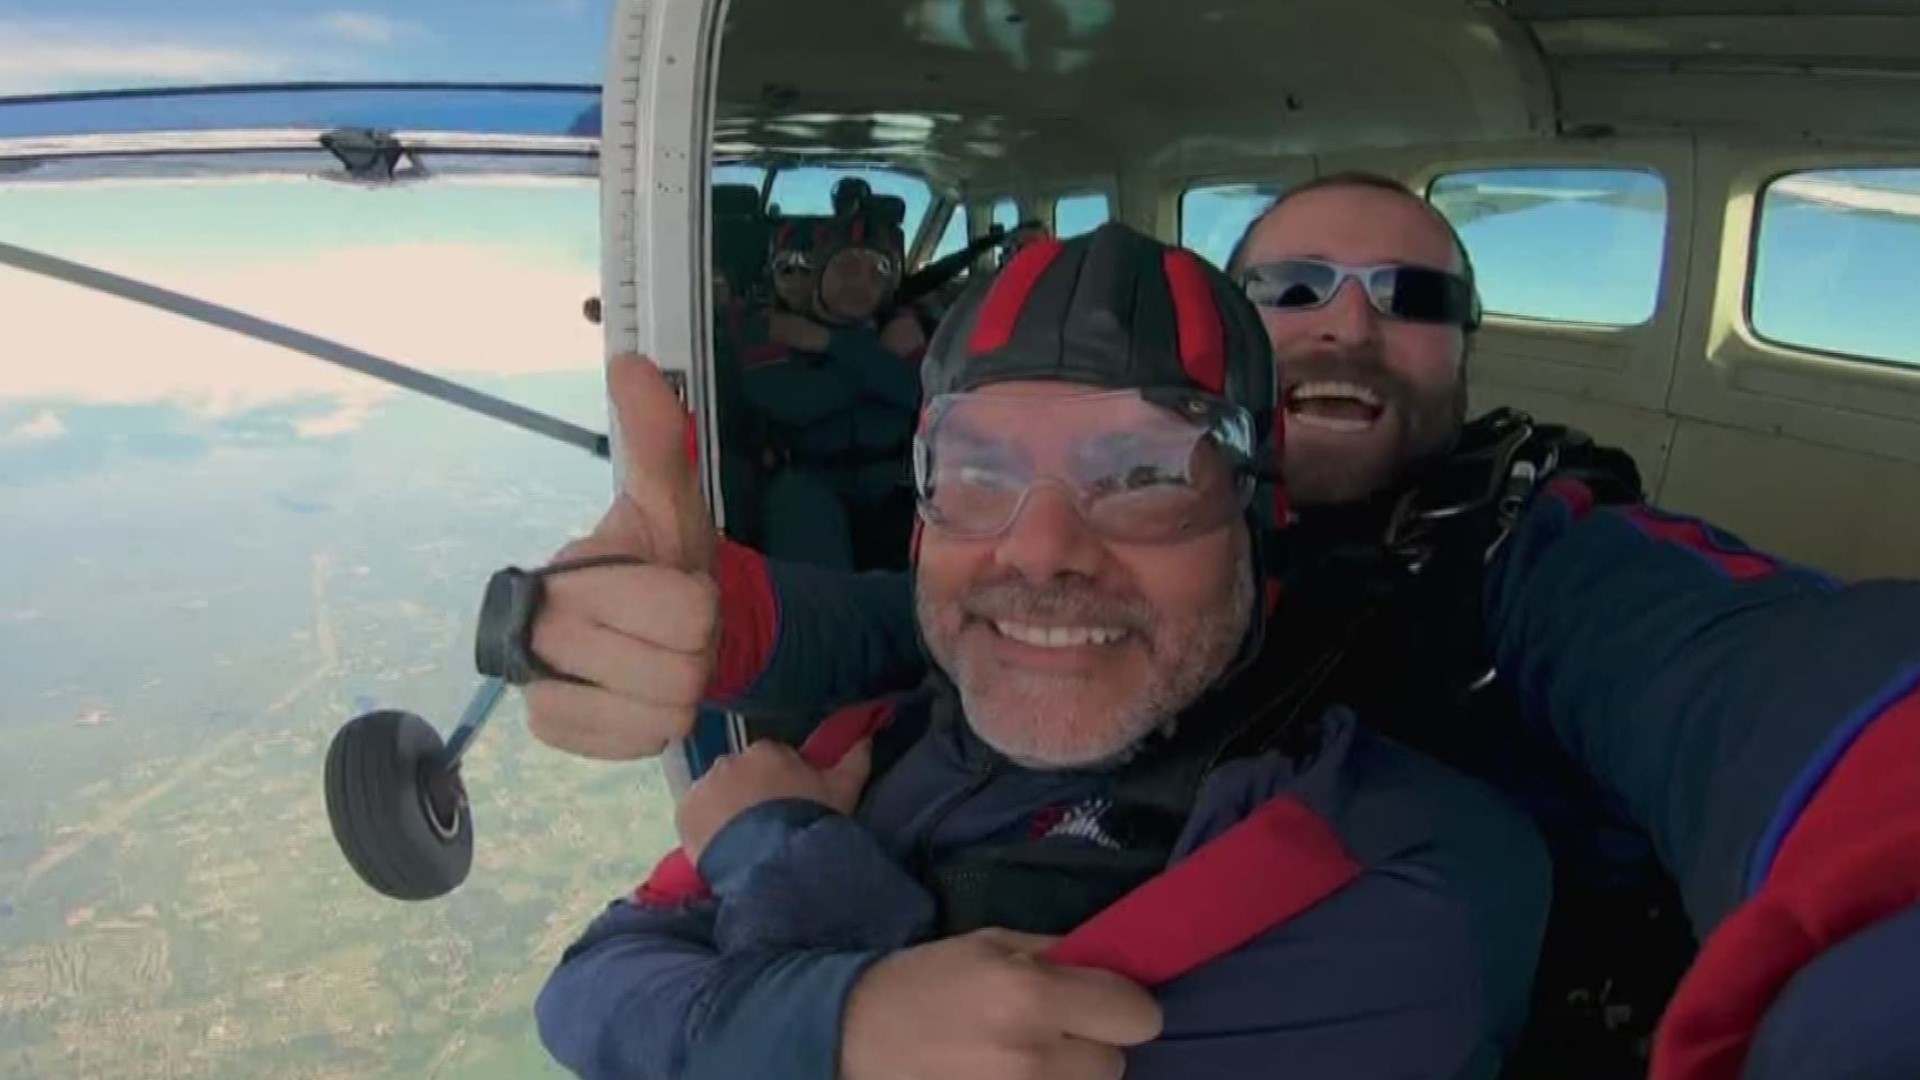 To motivate his students to go on a trip of a lifetime, Northwest Yeshiva High School Principal Jason Feld told them he would go skydiving if they raised enough money to fund their Jewish heritage trip.